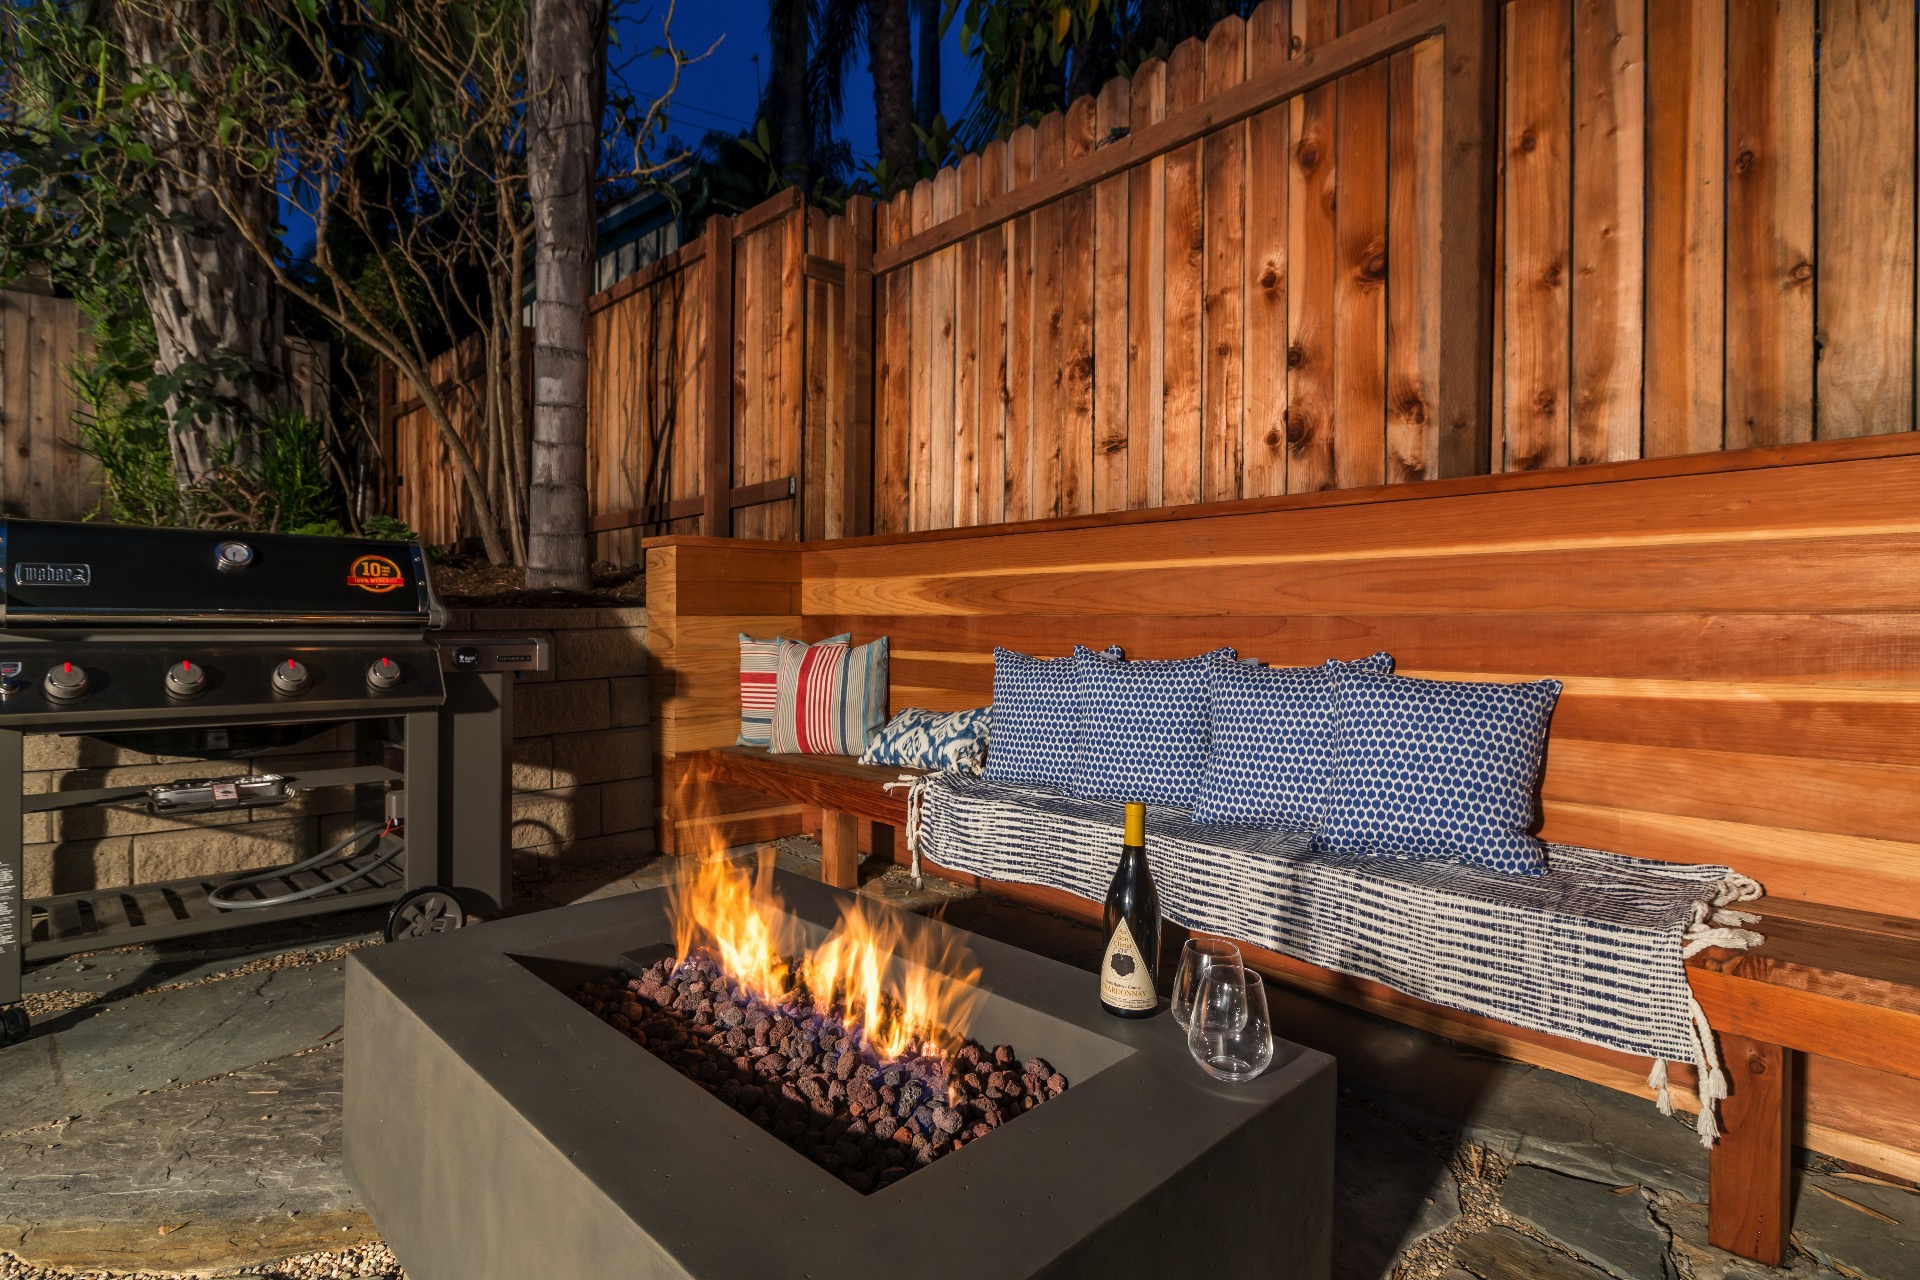 Enjoy a glass of your favorite wine next to the fire table.